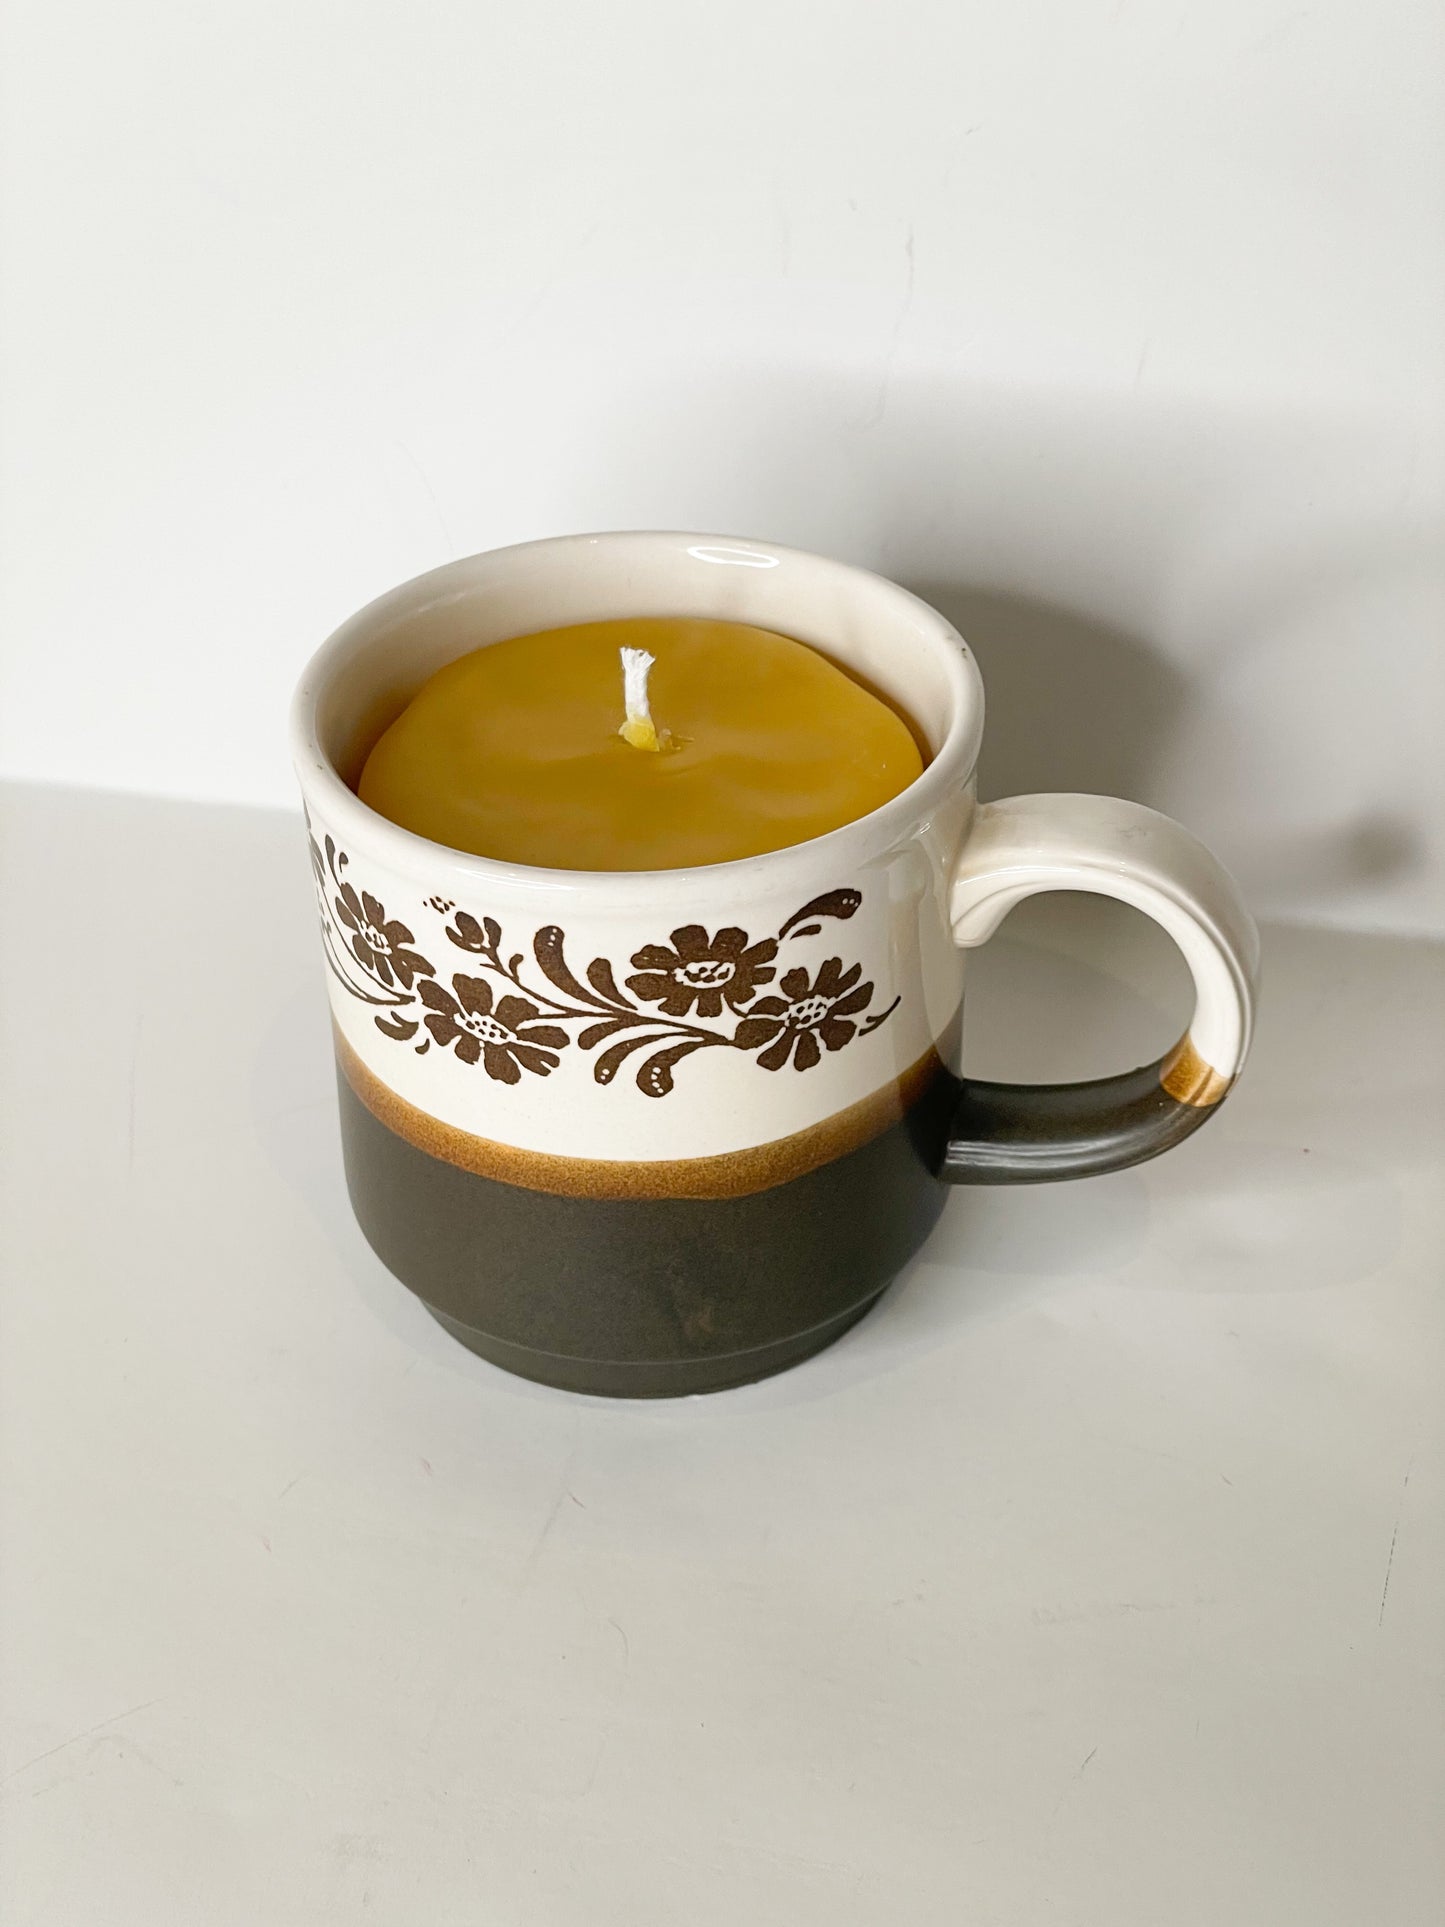 Biltons Brown Floral 100% Beeswax Upcycled Mug Candle - Clarity Floral Citrus Scent